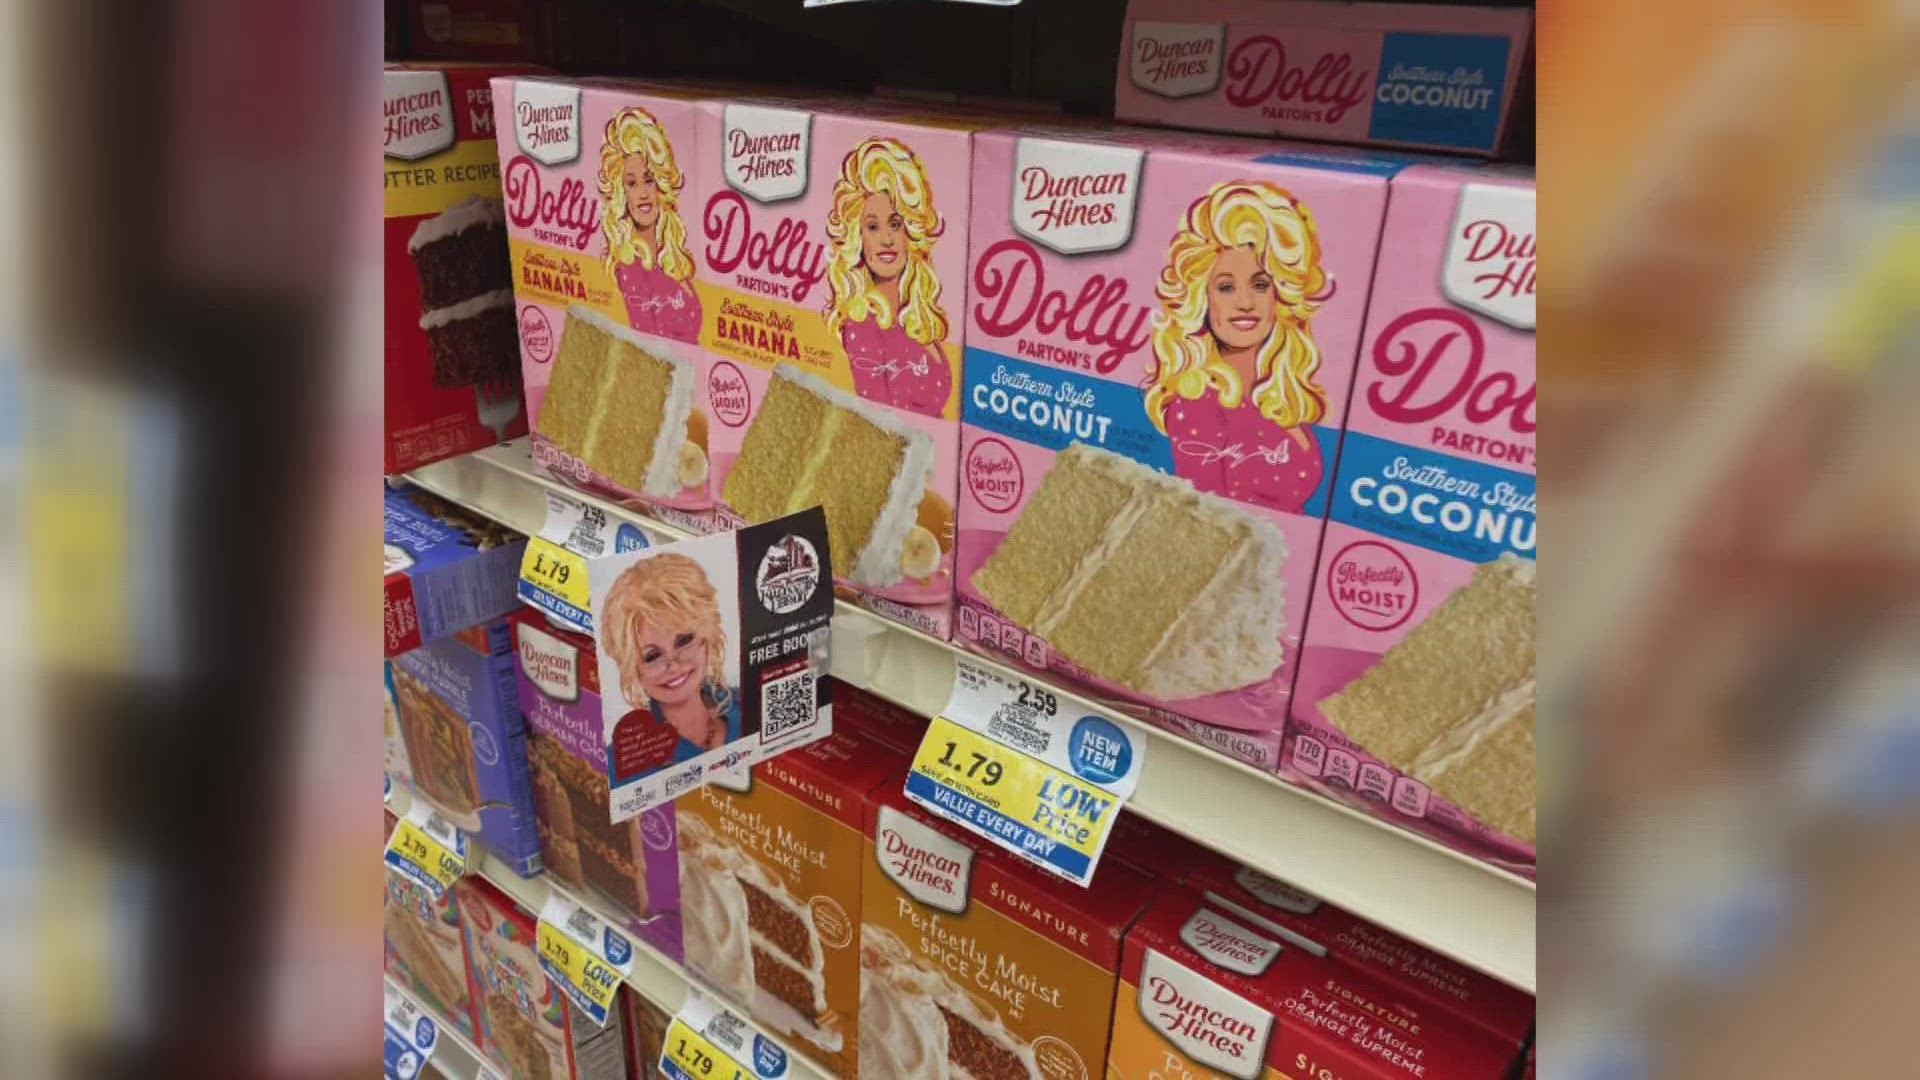 The signs are in the diapers and baby food aisles and of course near Dolly's cake mix.